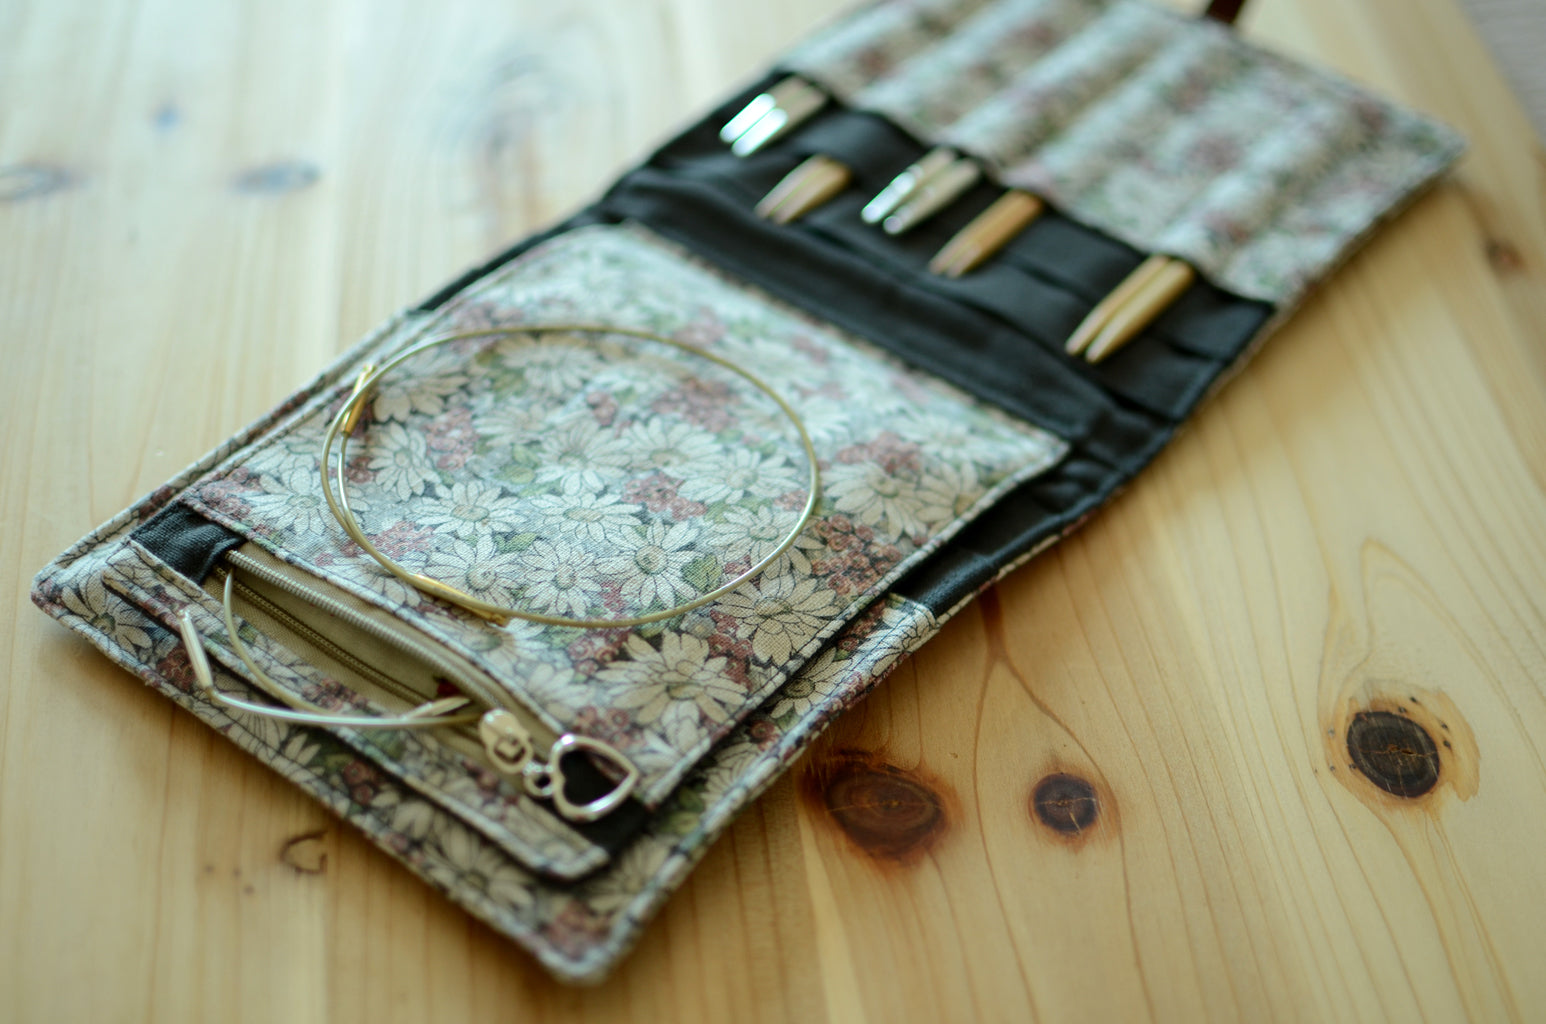 Sewing project for knitters: an interchangeable needle case.